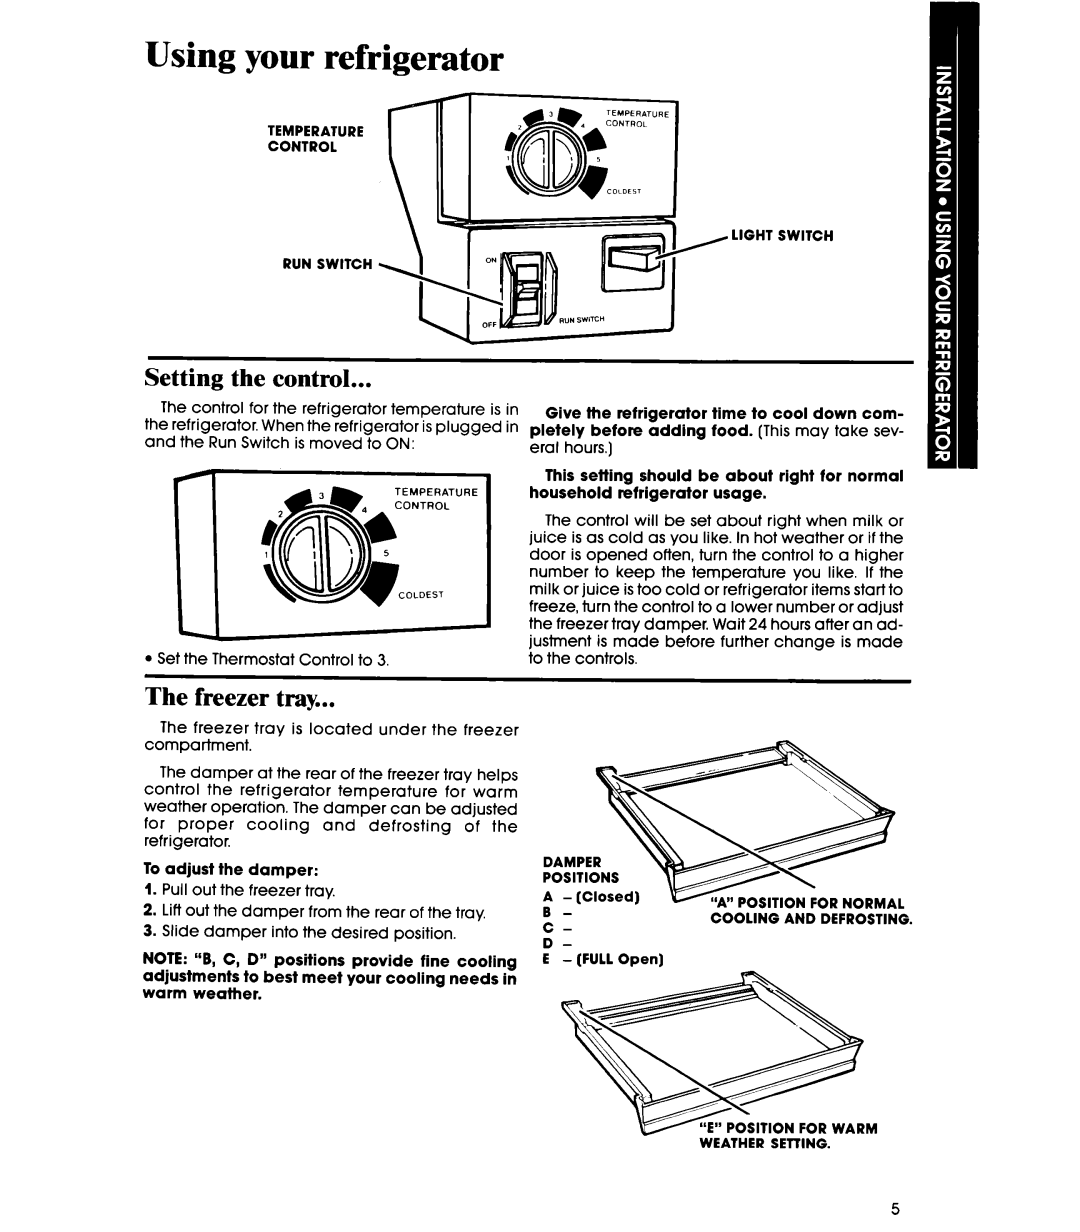 Whirlpool EL15SC manual Using your refrigerator, Setting the control, The freezer tray 